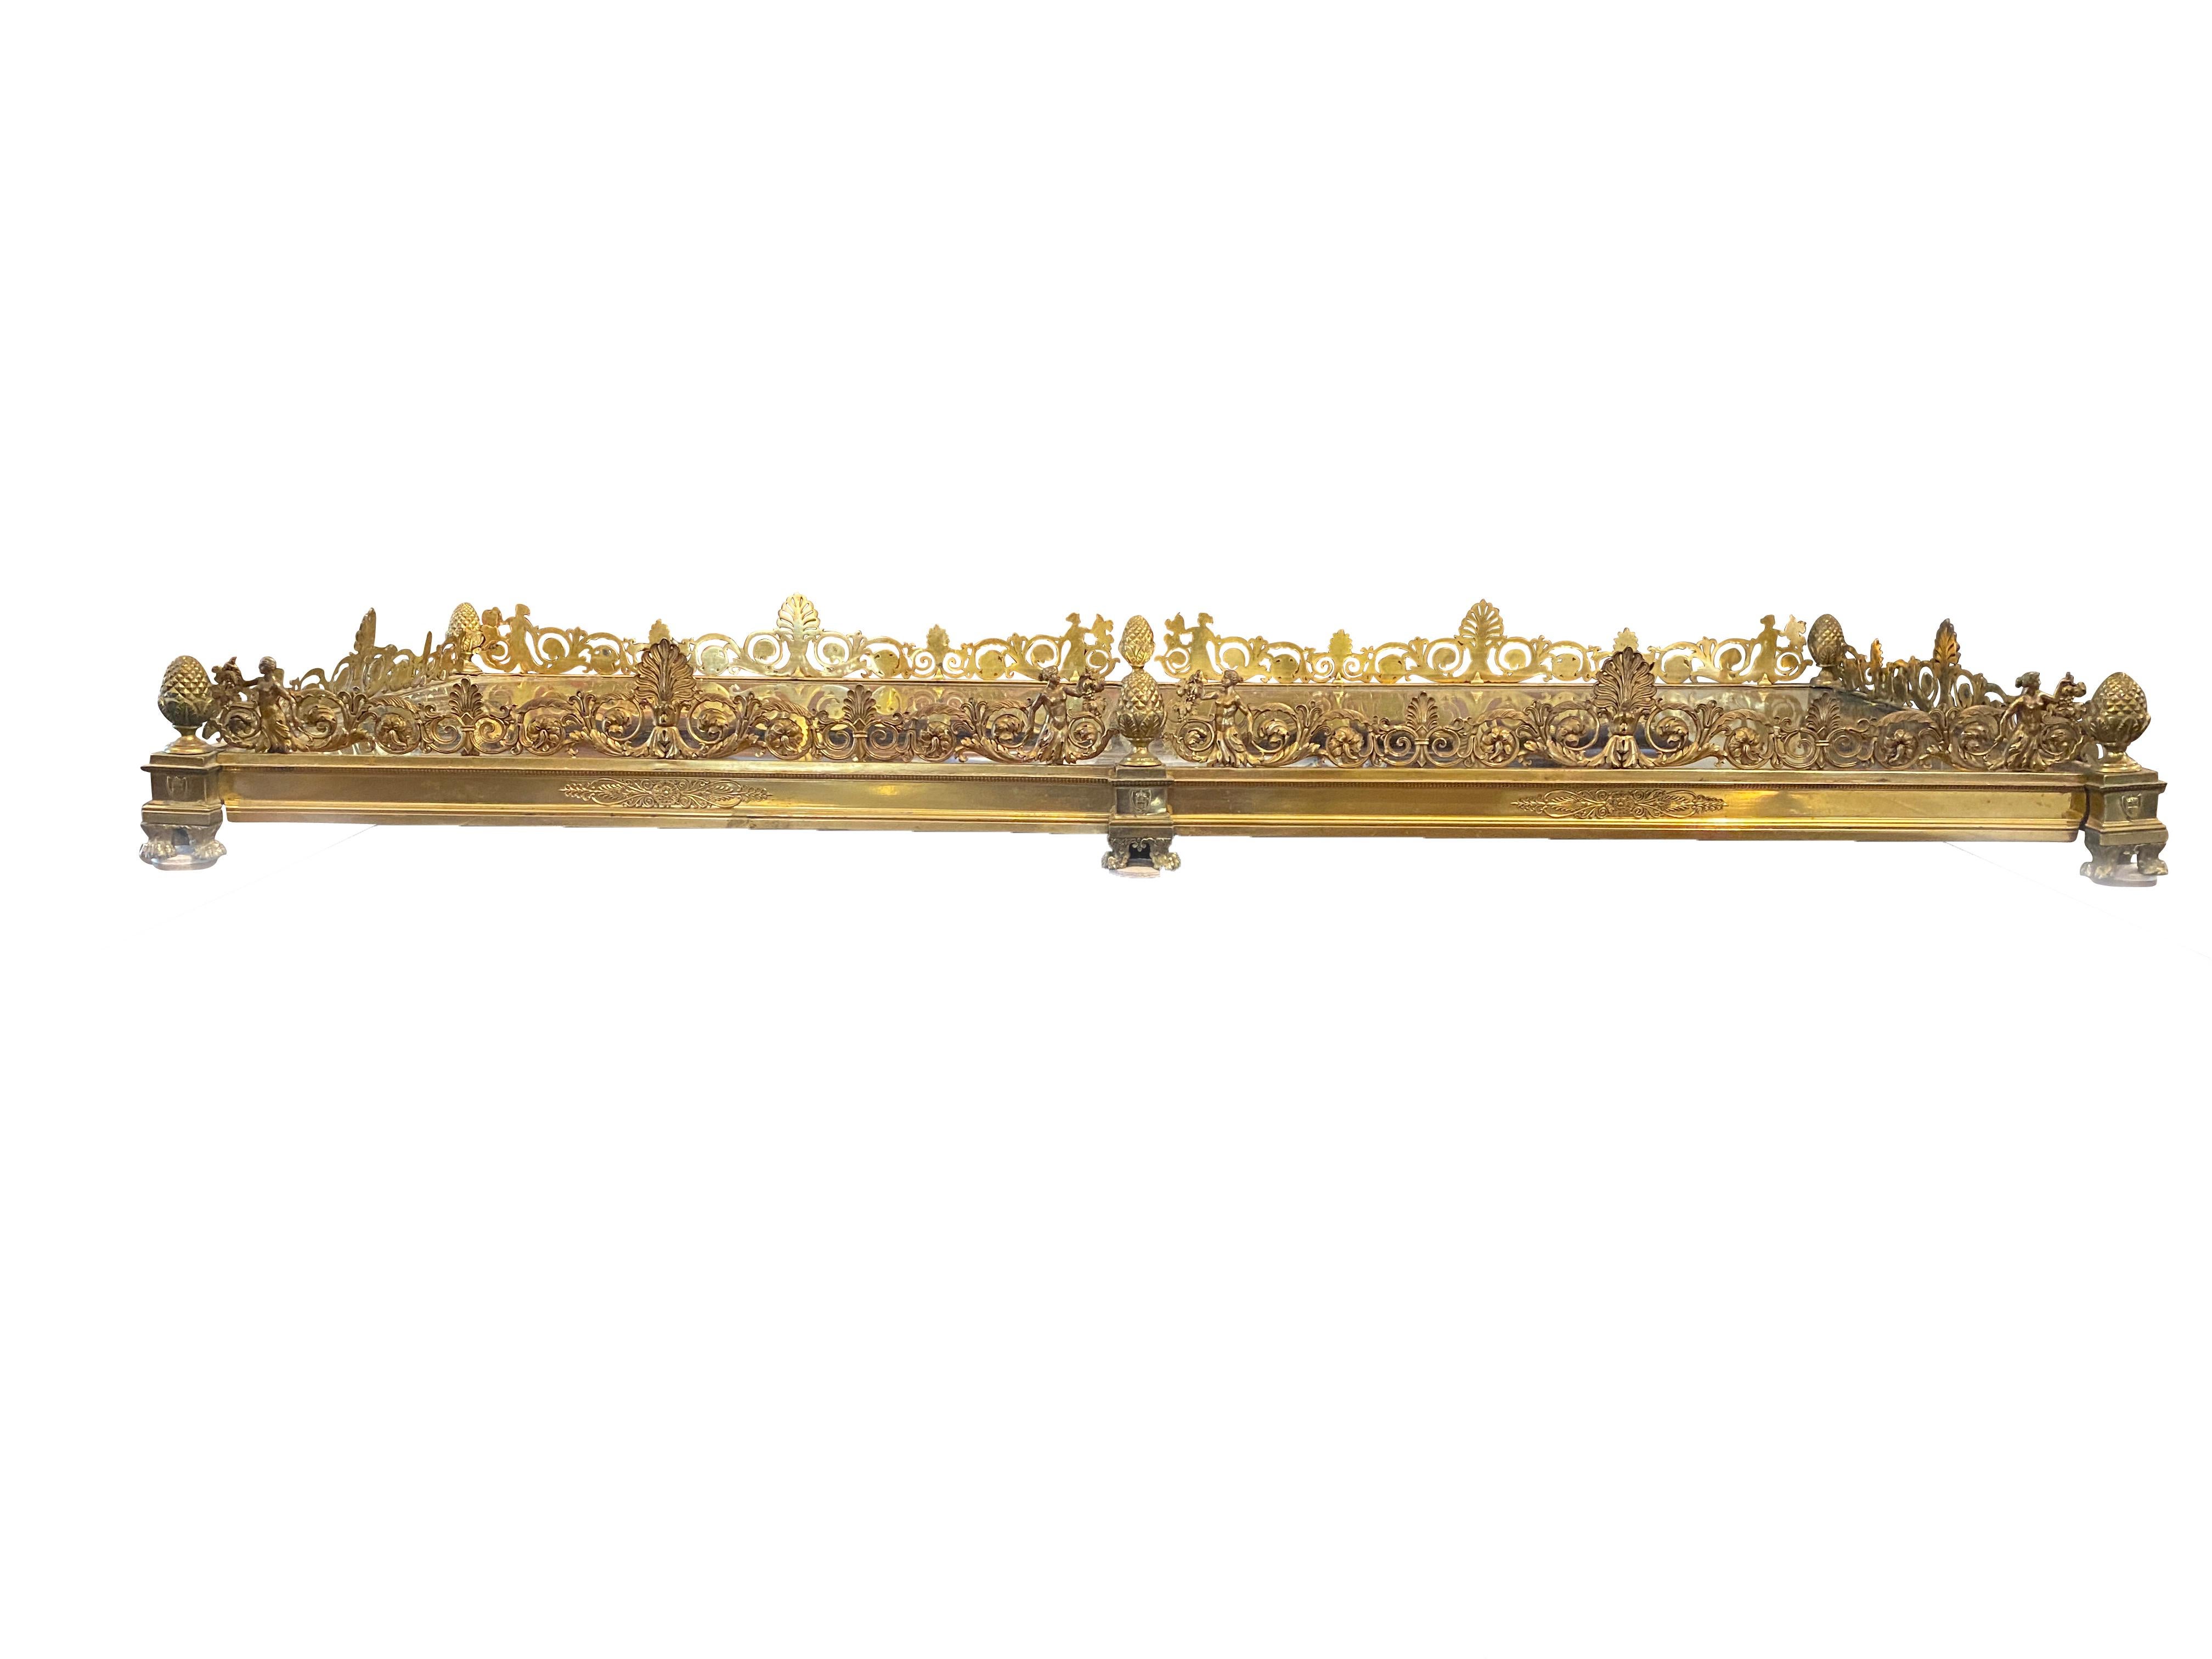 Rectangular with two part mirror plate within a frame decorated with finely cast anthemion and scrolling arabesques and female herms. This piece is finely cast gold plated bronze and would be placed in the center of a dining table. It has a small